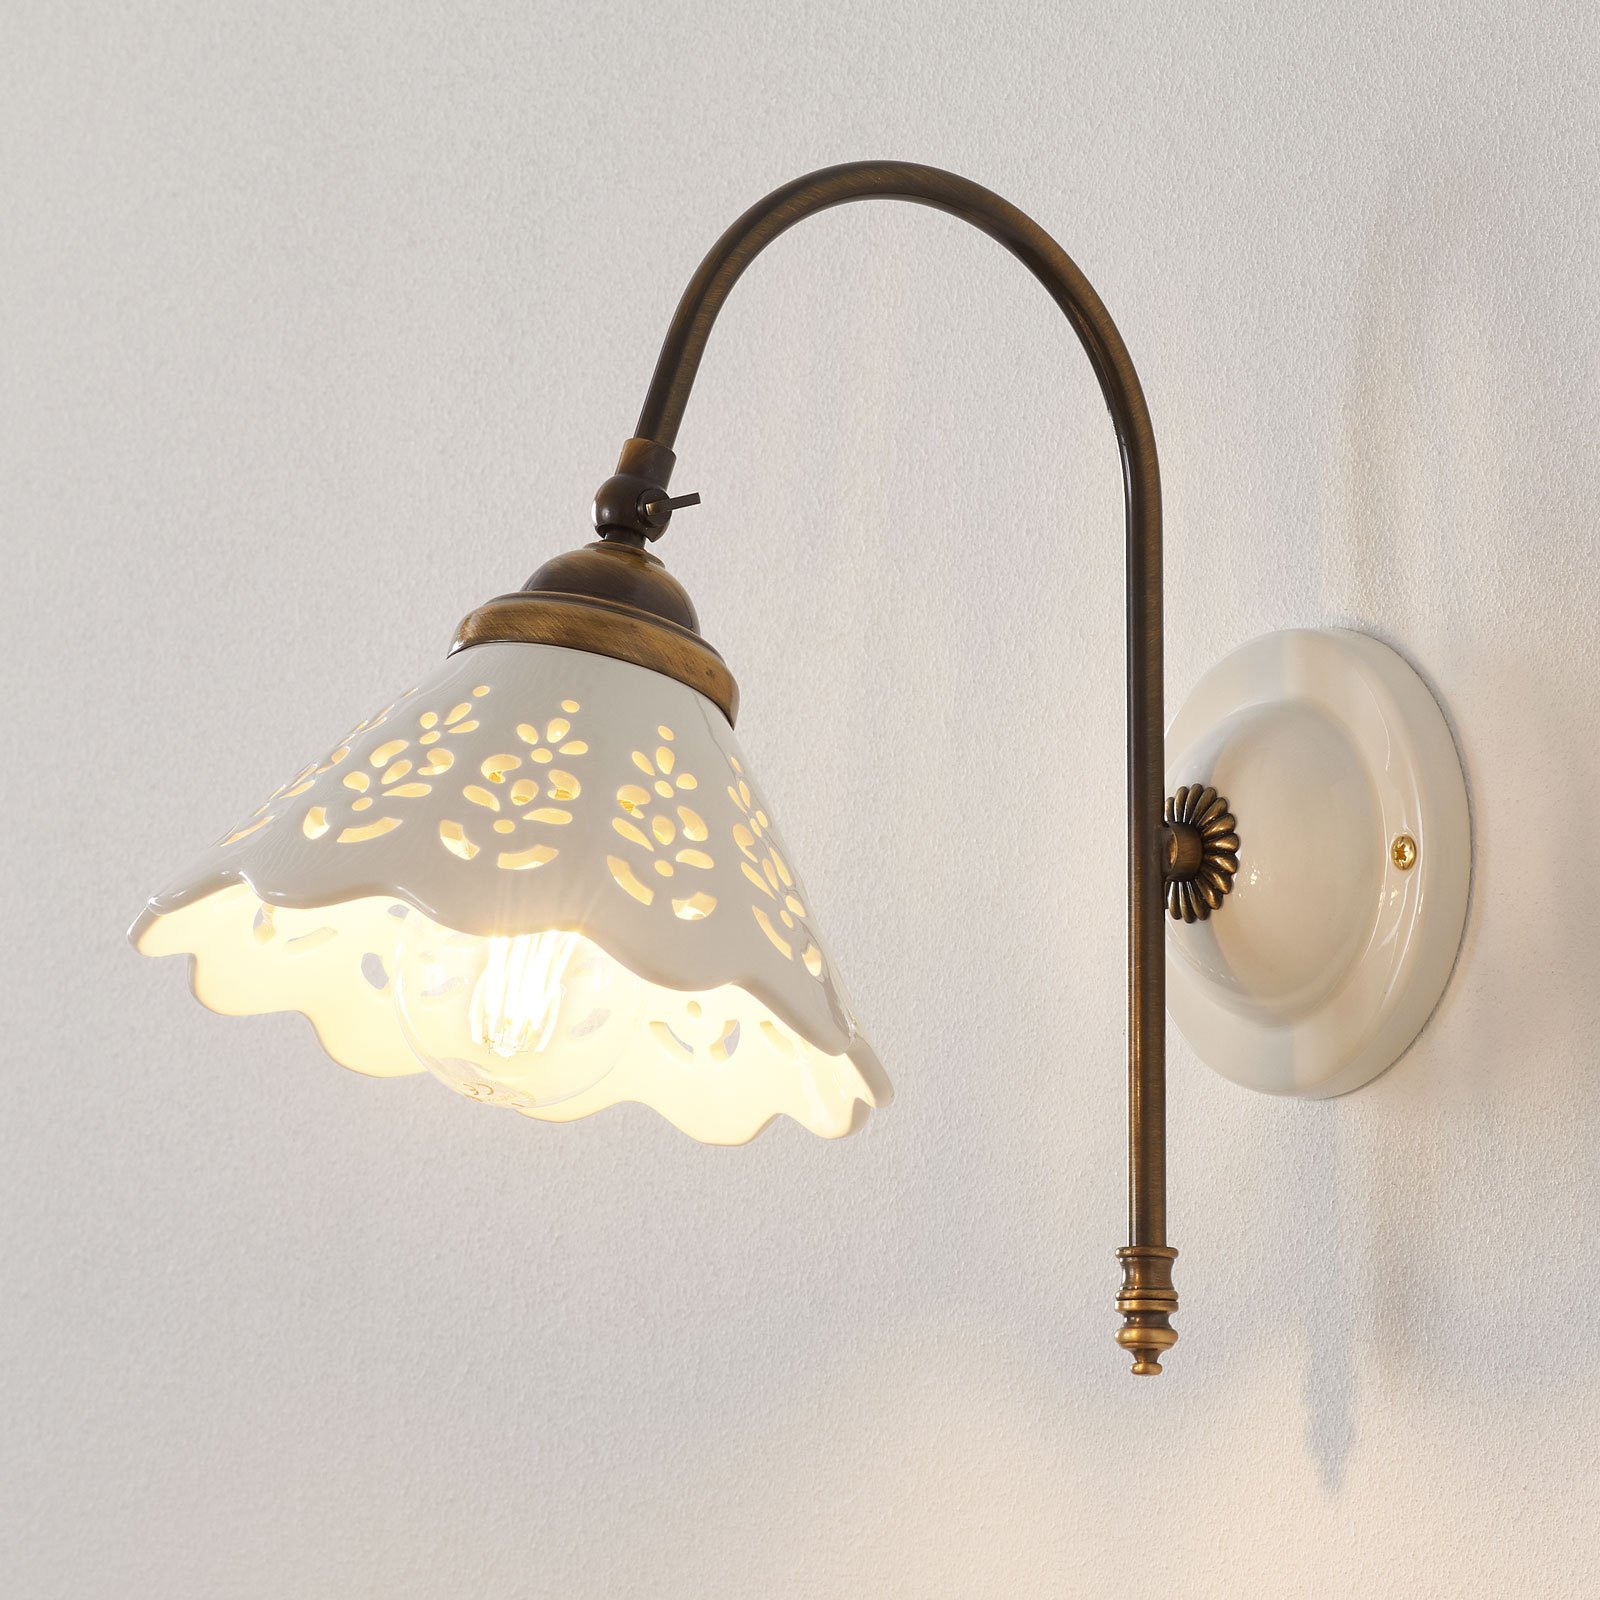 Portico - wall light with a curved arm